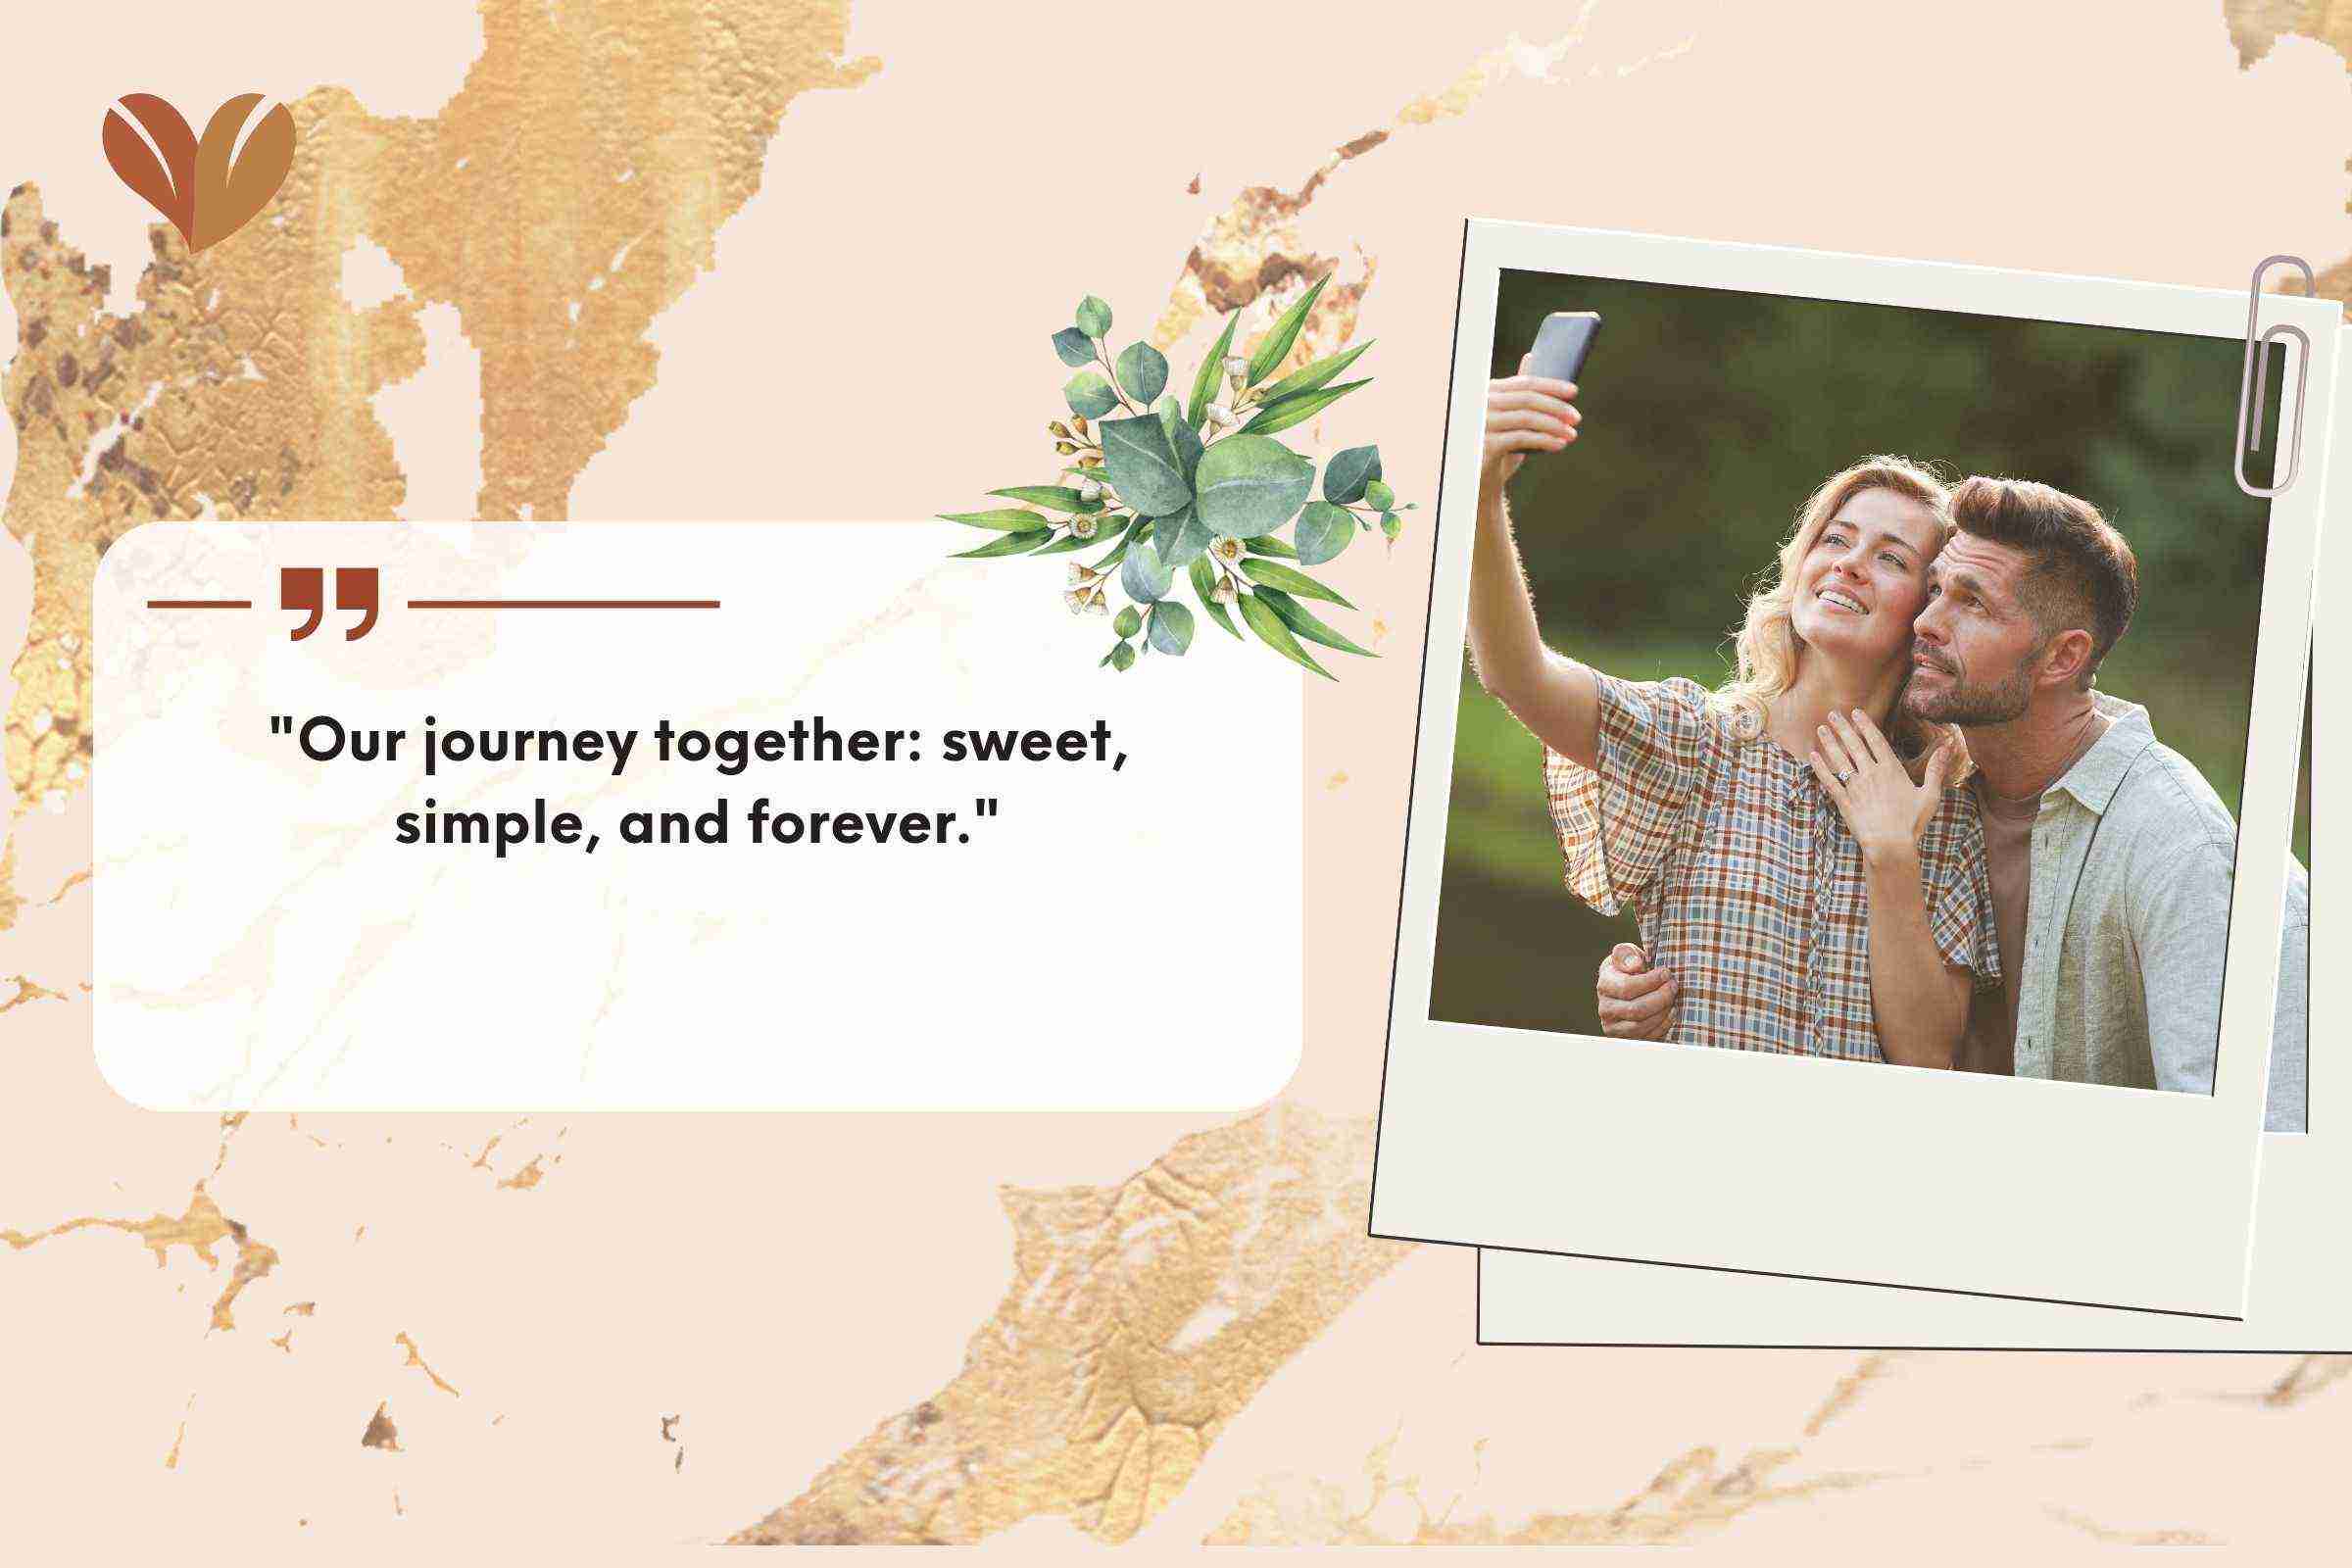 In the journey of love, our next chapter starts with an engagement ring and a promise.